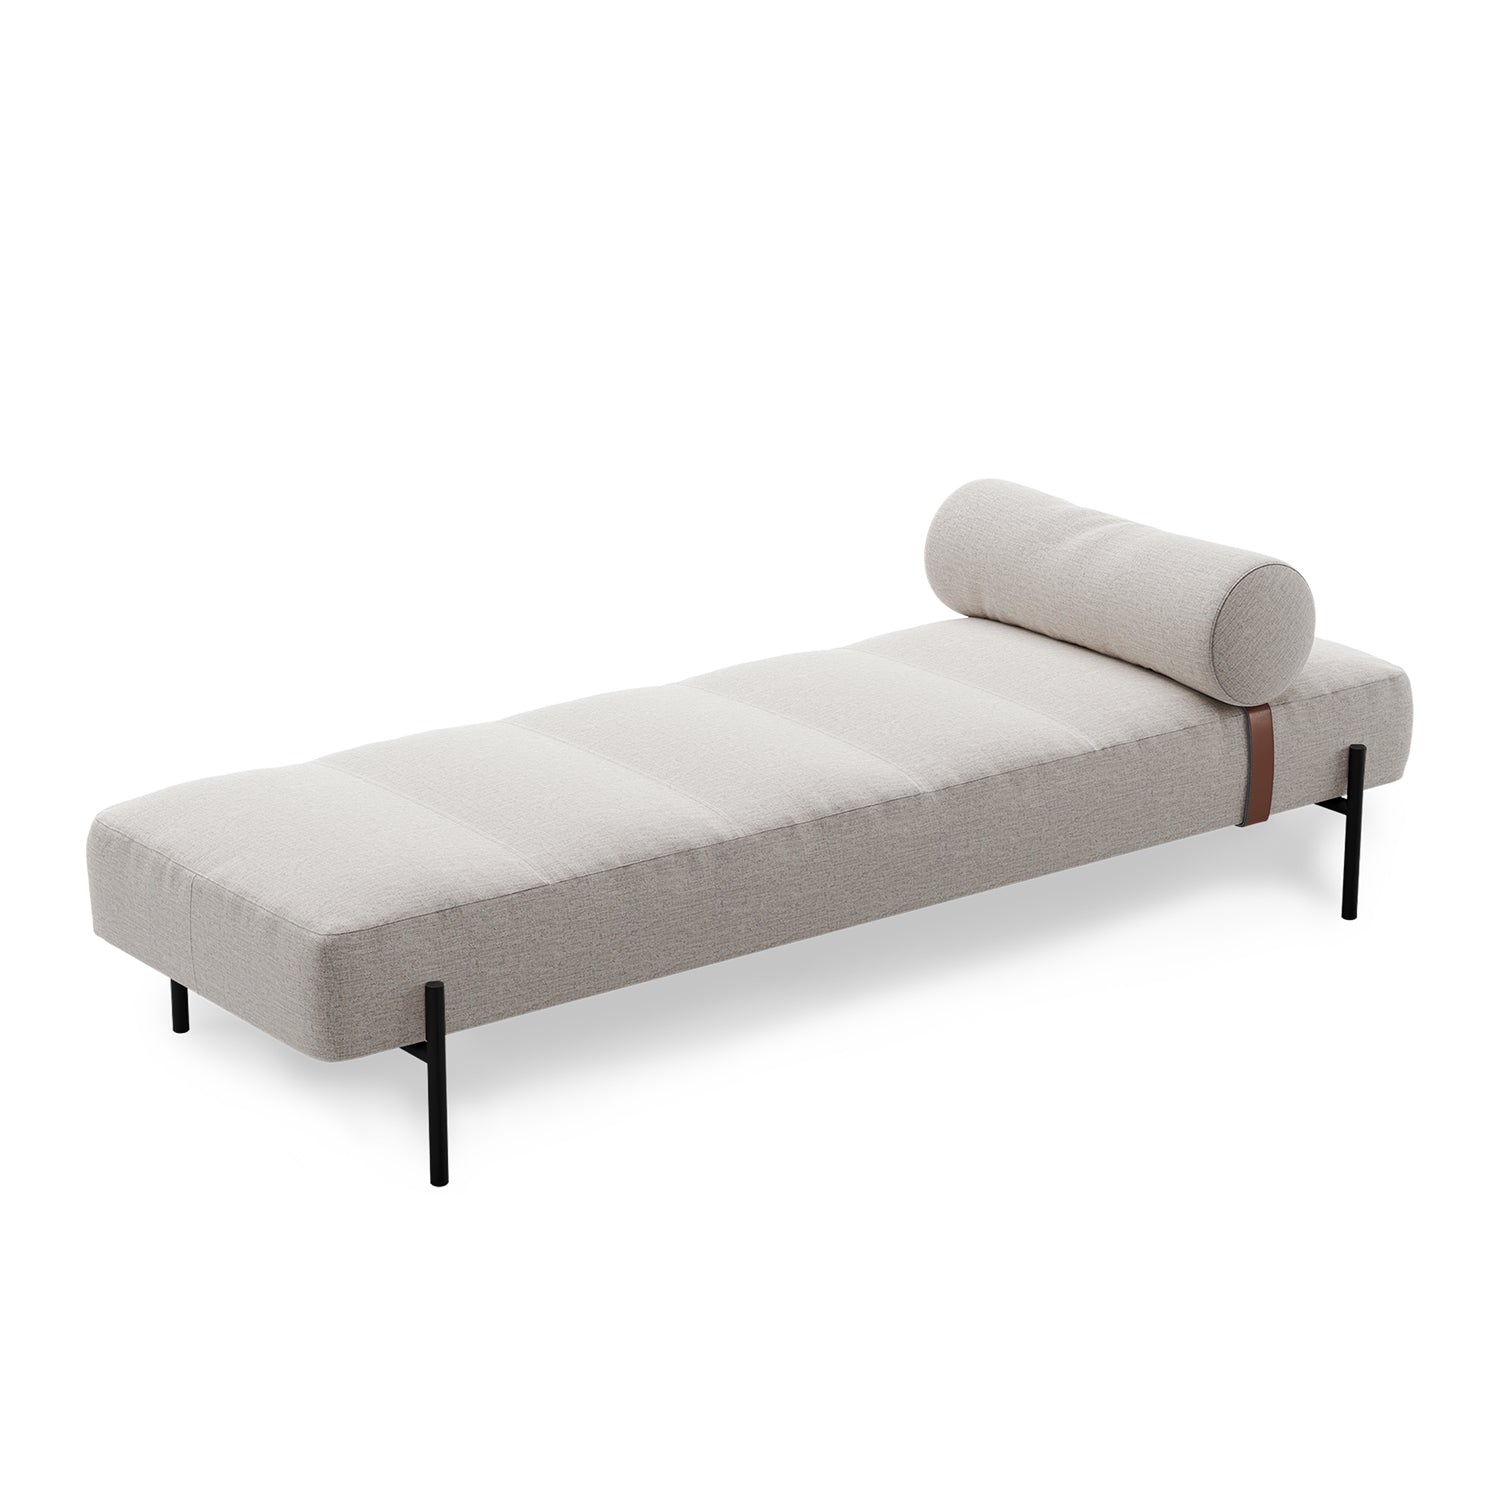 Northern Daybe Daybed in brusvik 02 and Black legs